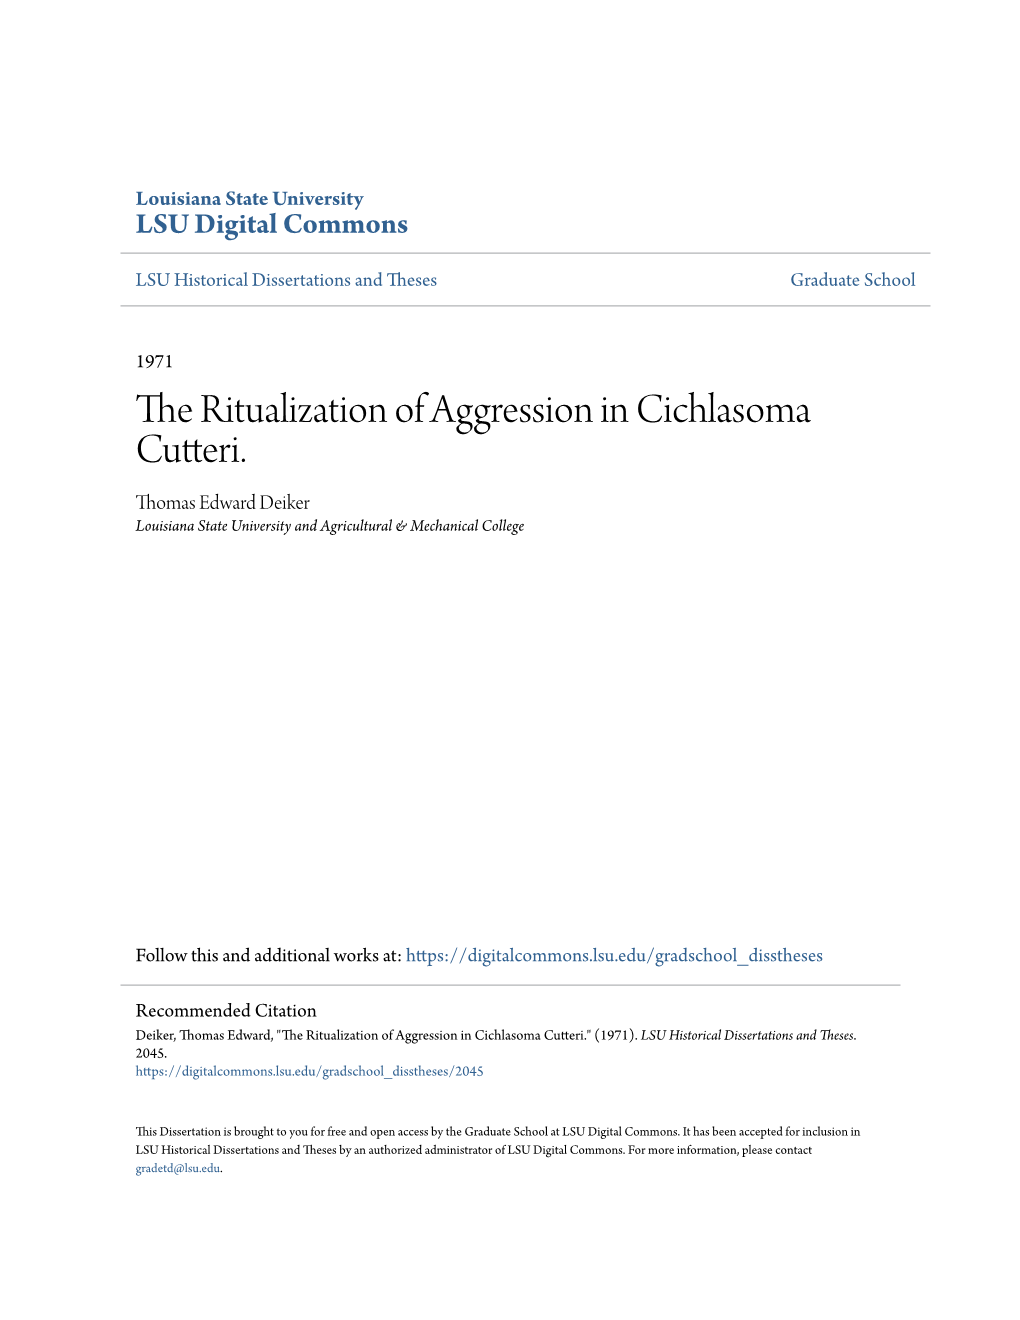 The Ritualization of Aggression in Cichlasoma Cutteri. Thomas Edward Deiker Louisiana State University and Agricultural & Mechanical College